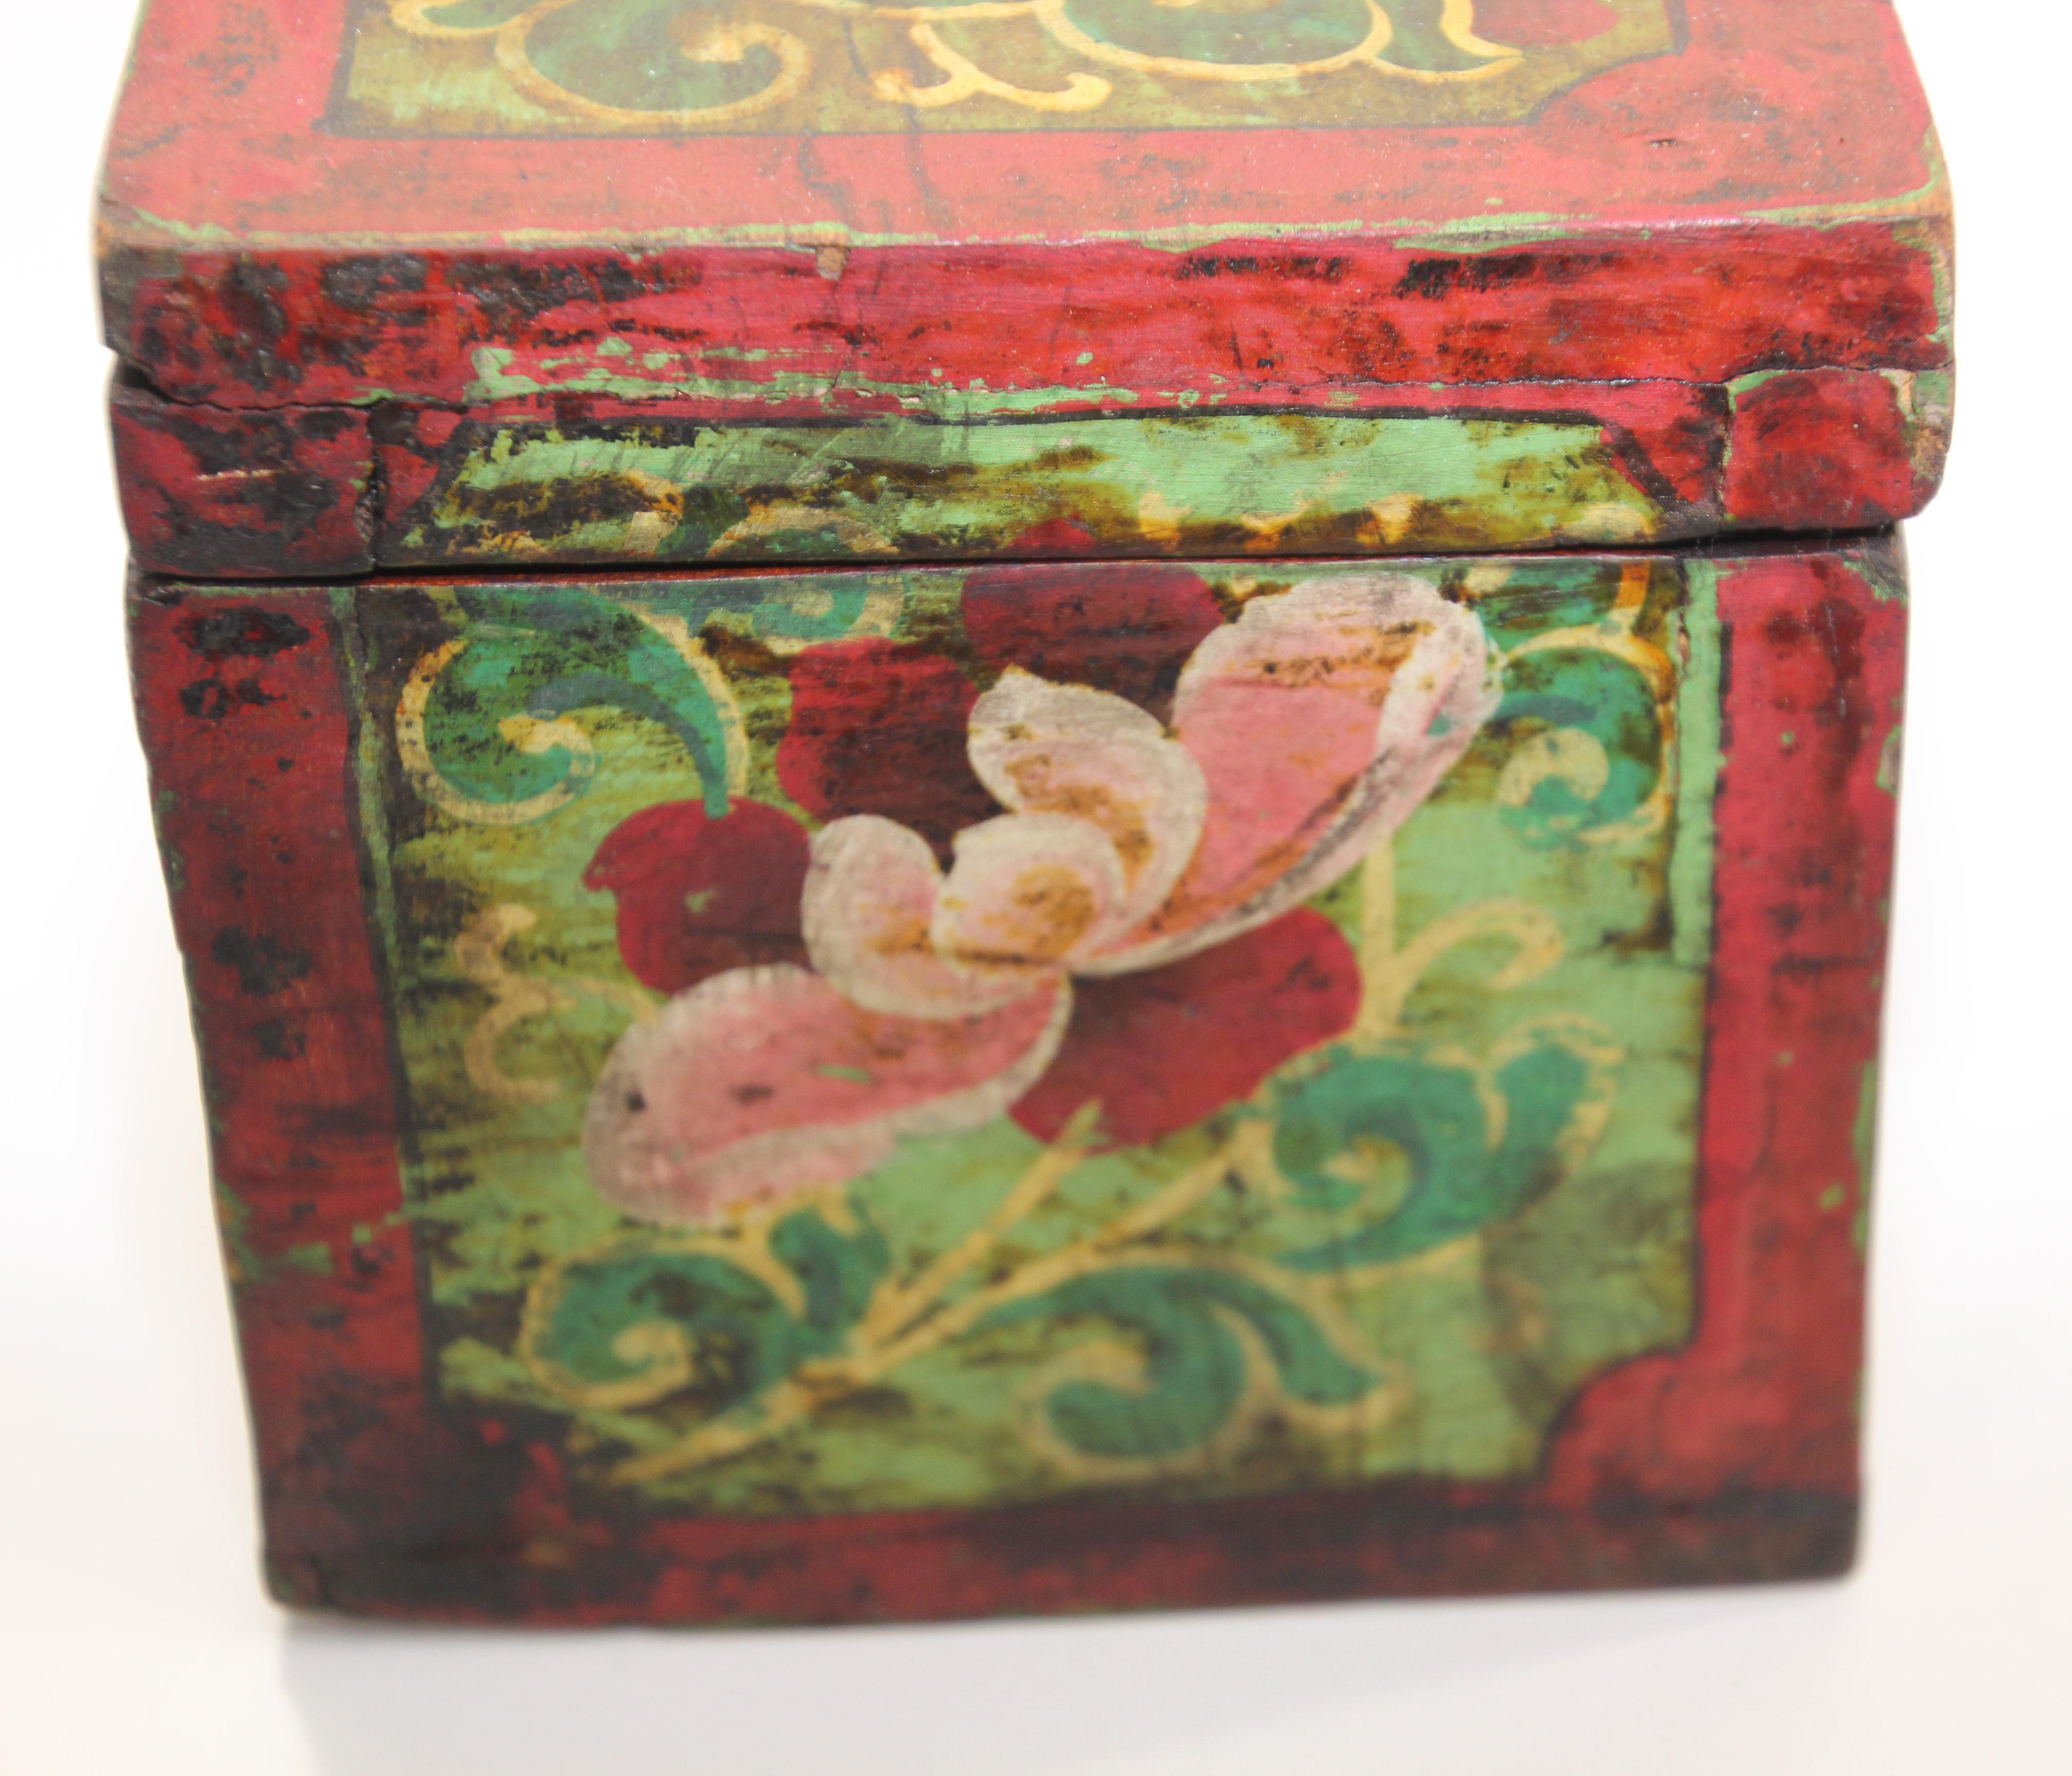 Tibetan Hand Painted Decorative Box with Floral Designs 2